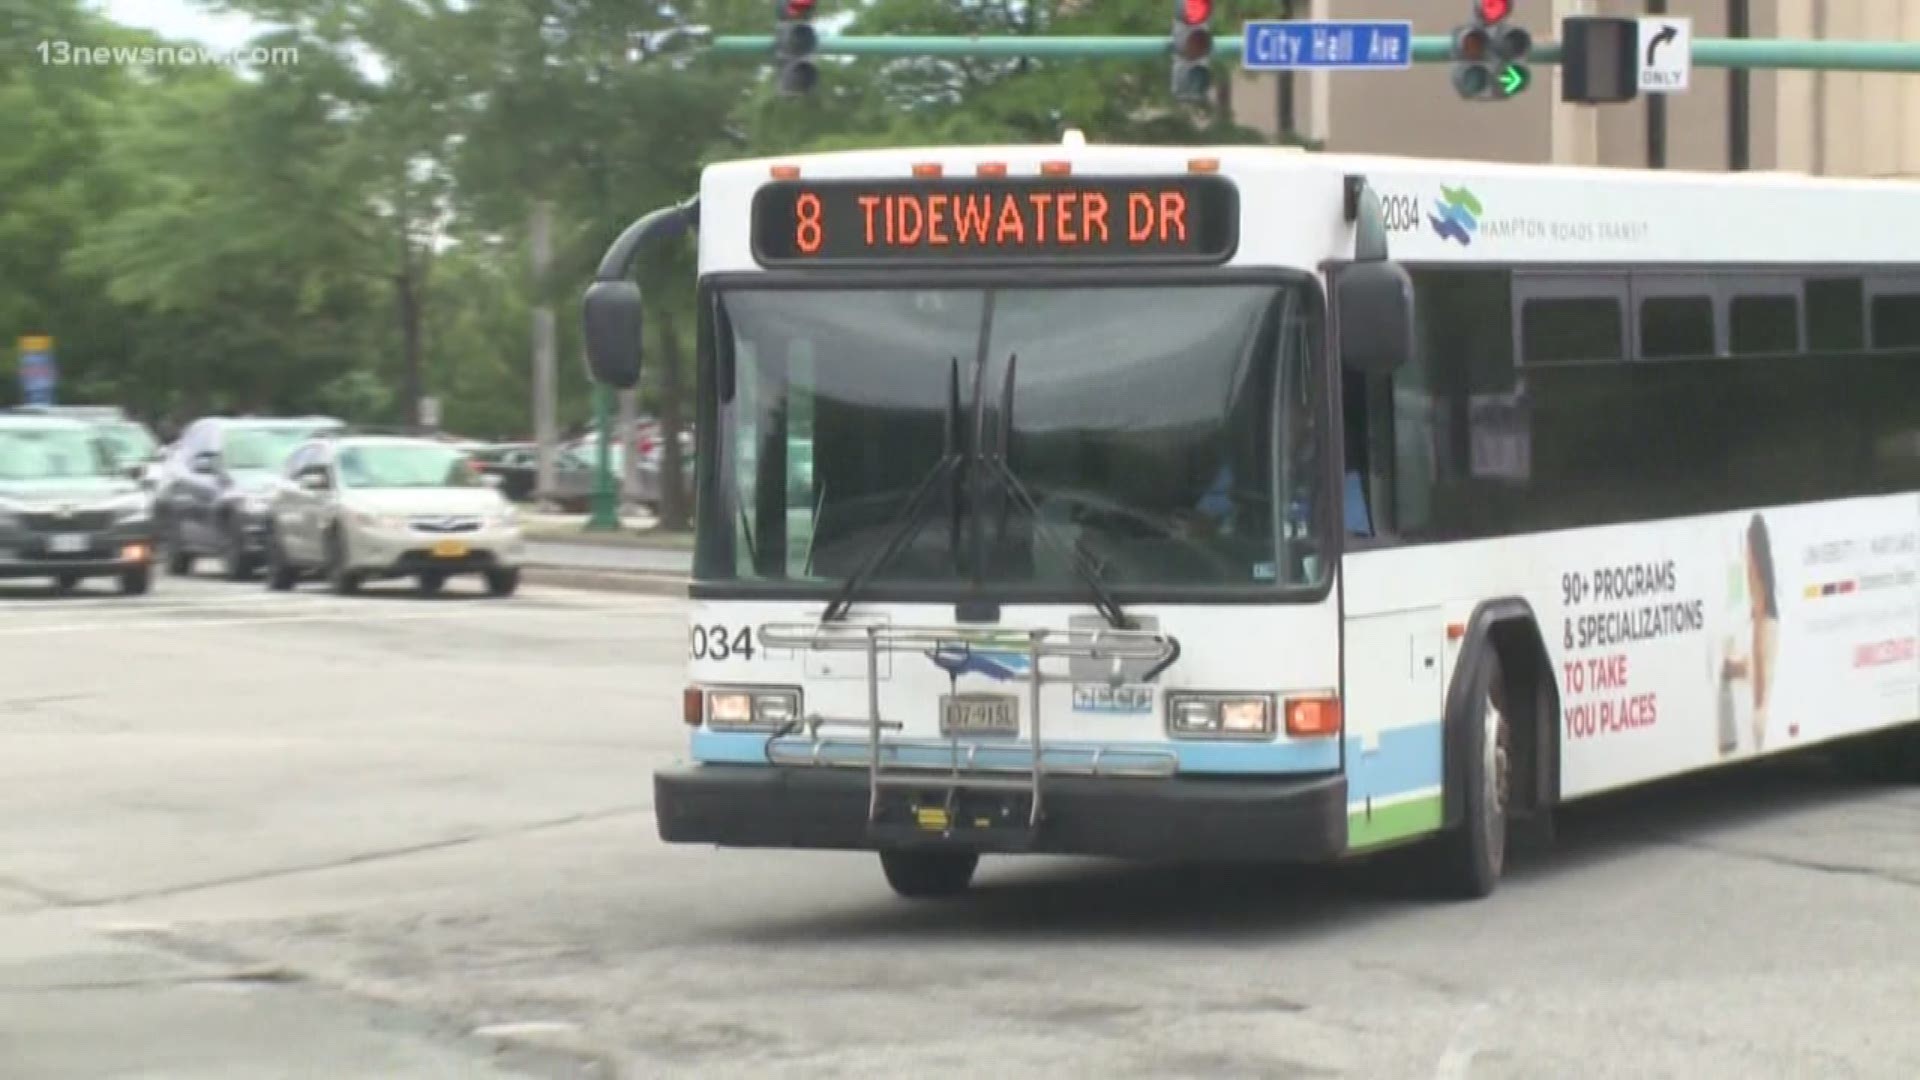 Hampton Roads Transit has updated its policies and practices to help prevent against the spread of coronaivrus on public vehicles.